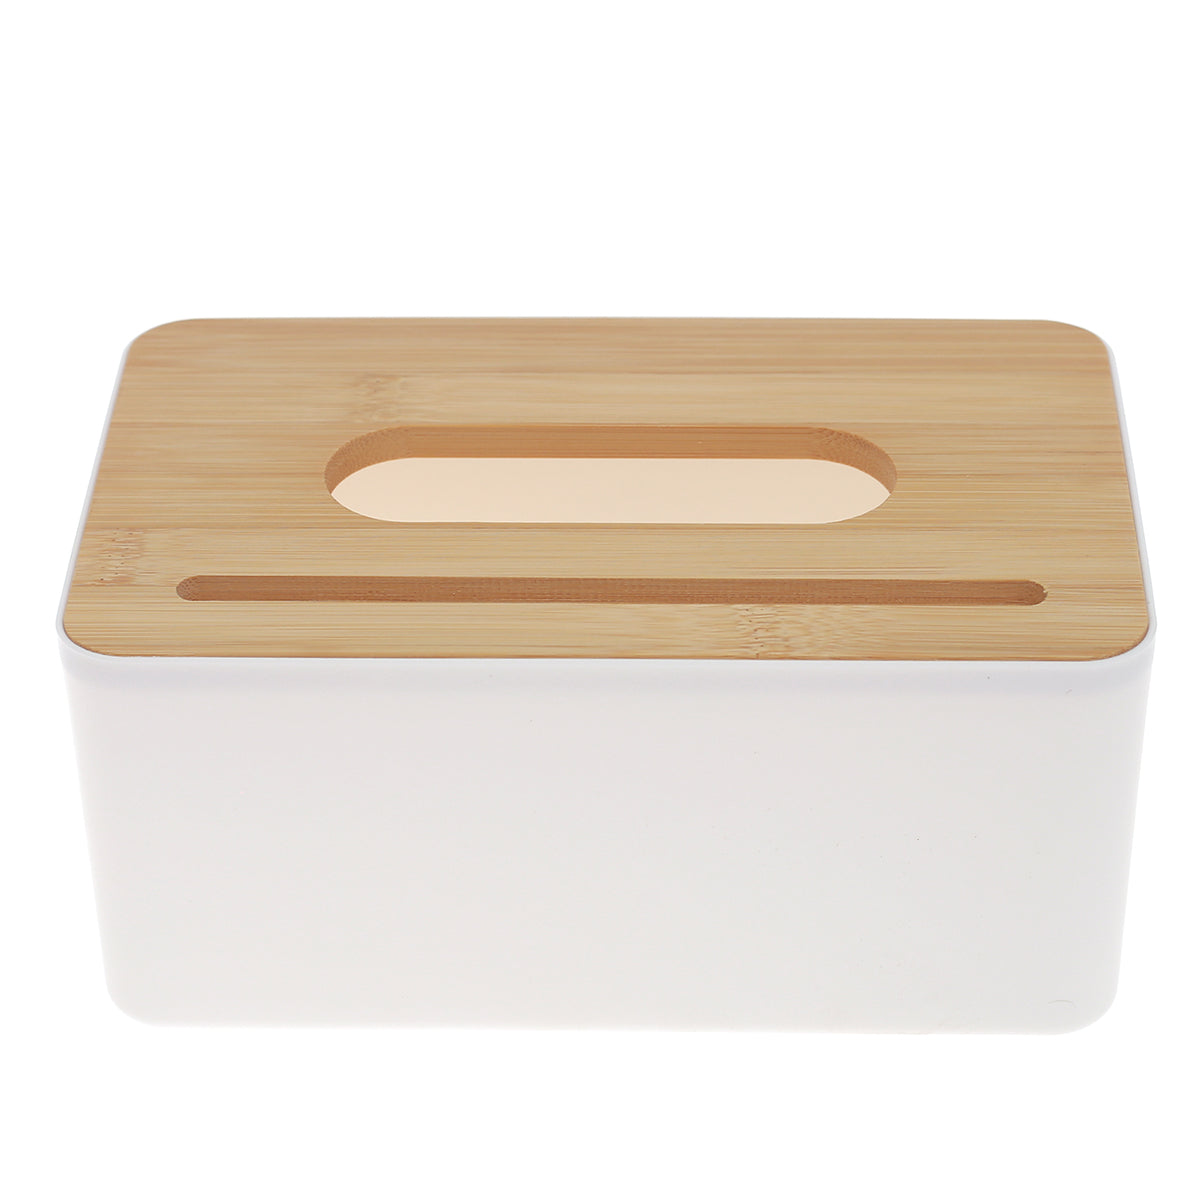 TISSUE BOX WITH BAMBOO WOODEN LID